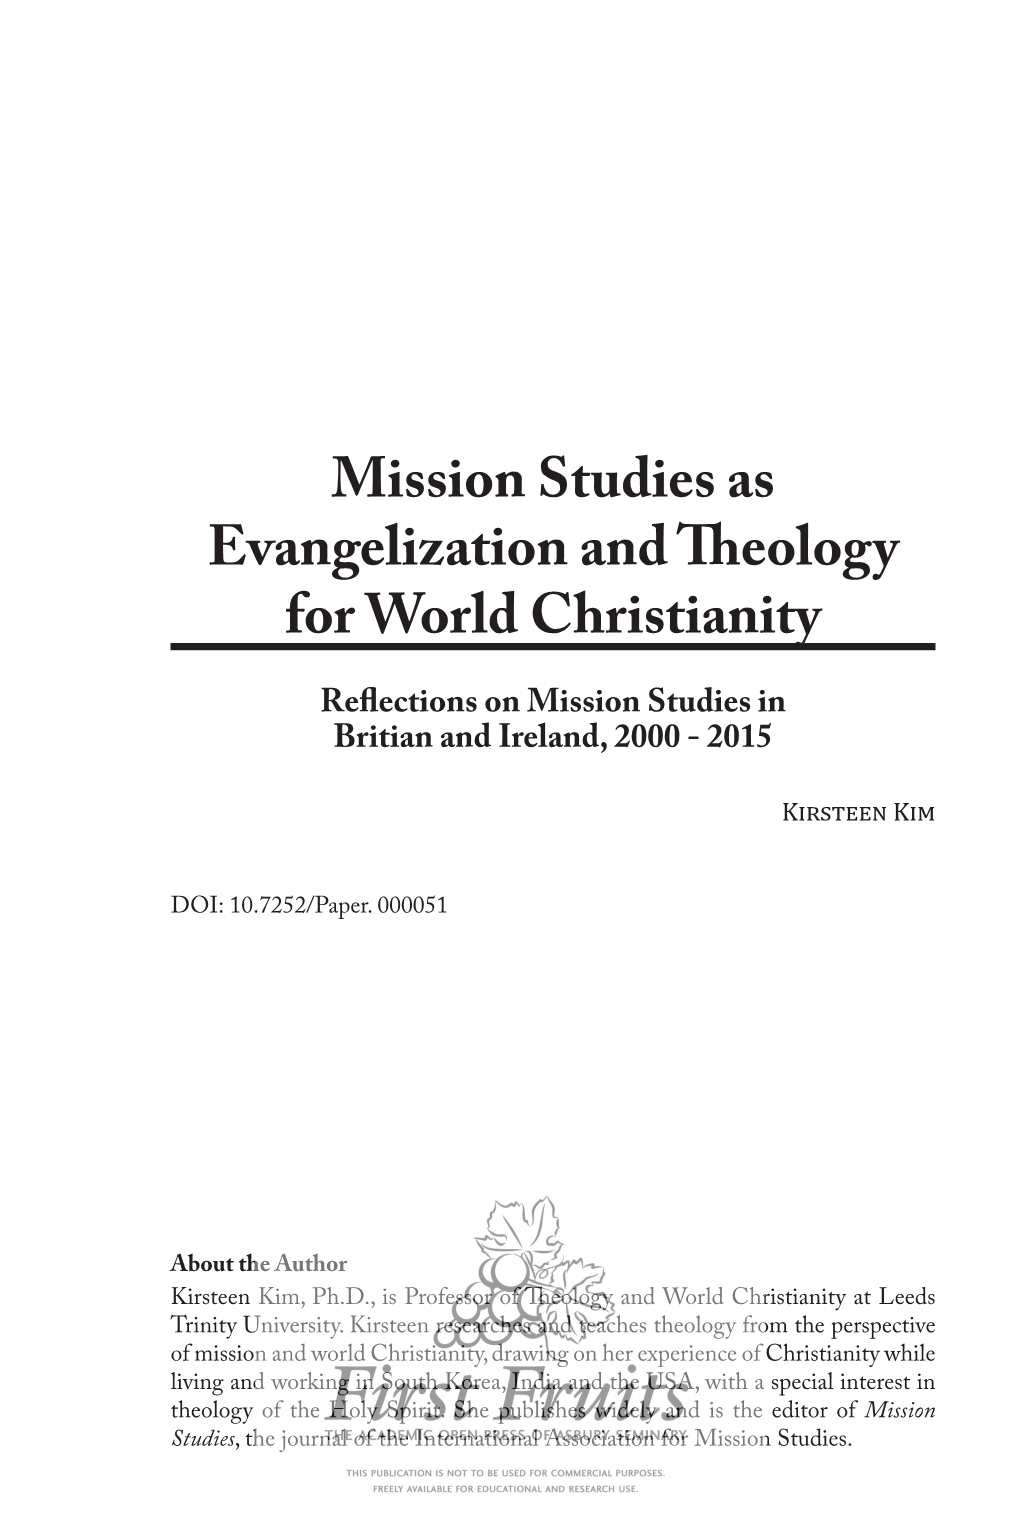 Mission Studies As Evangelization and Theology for World Christianity